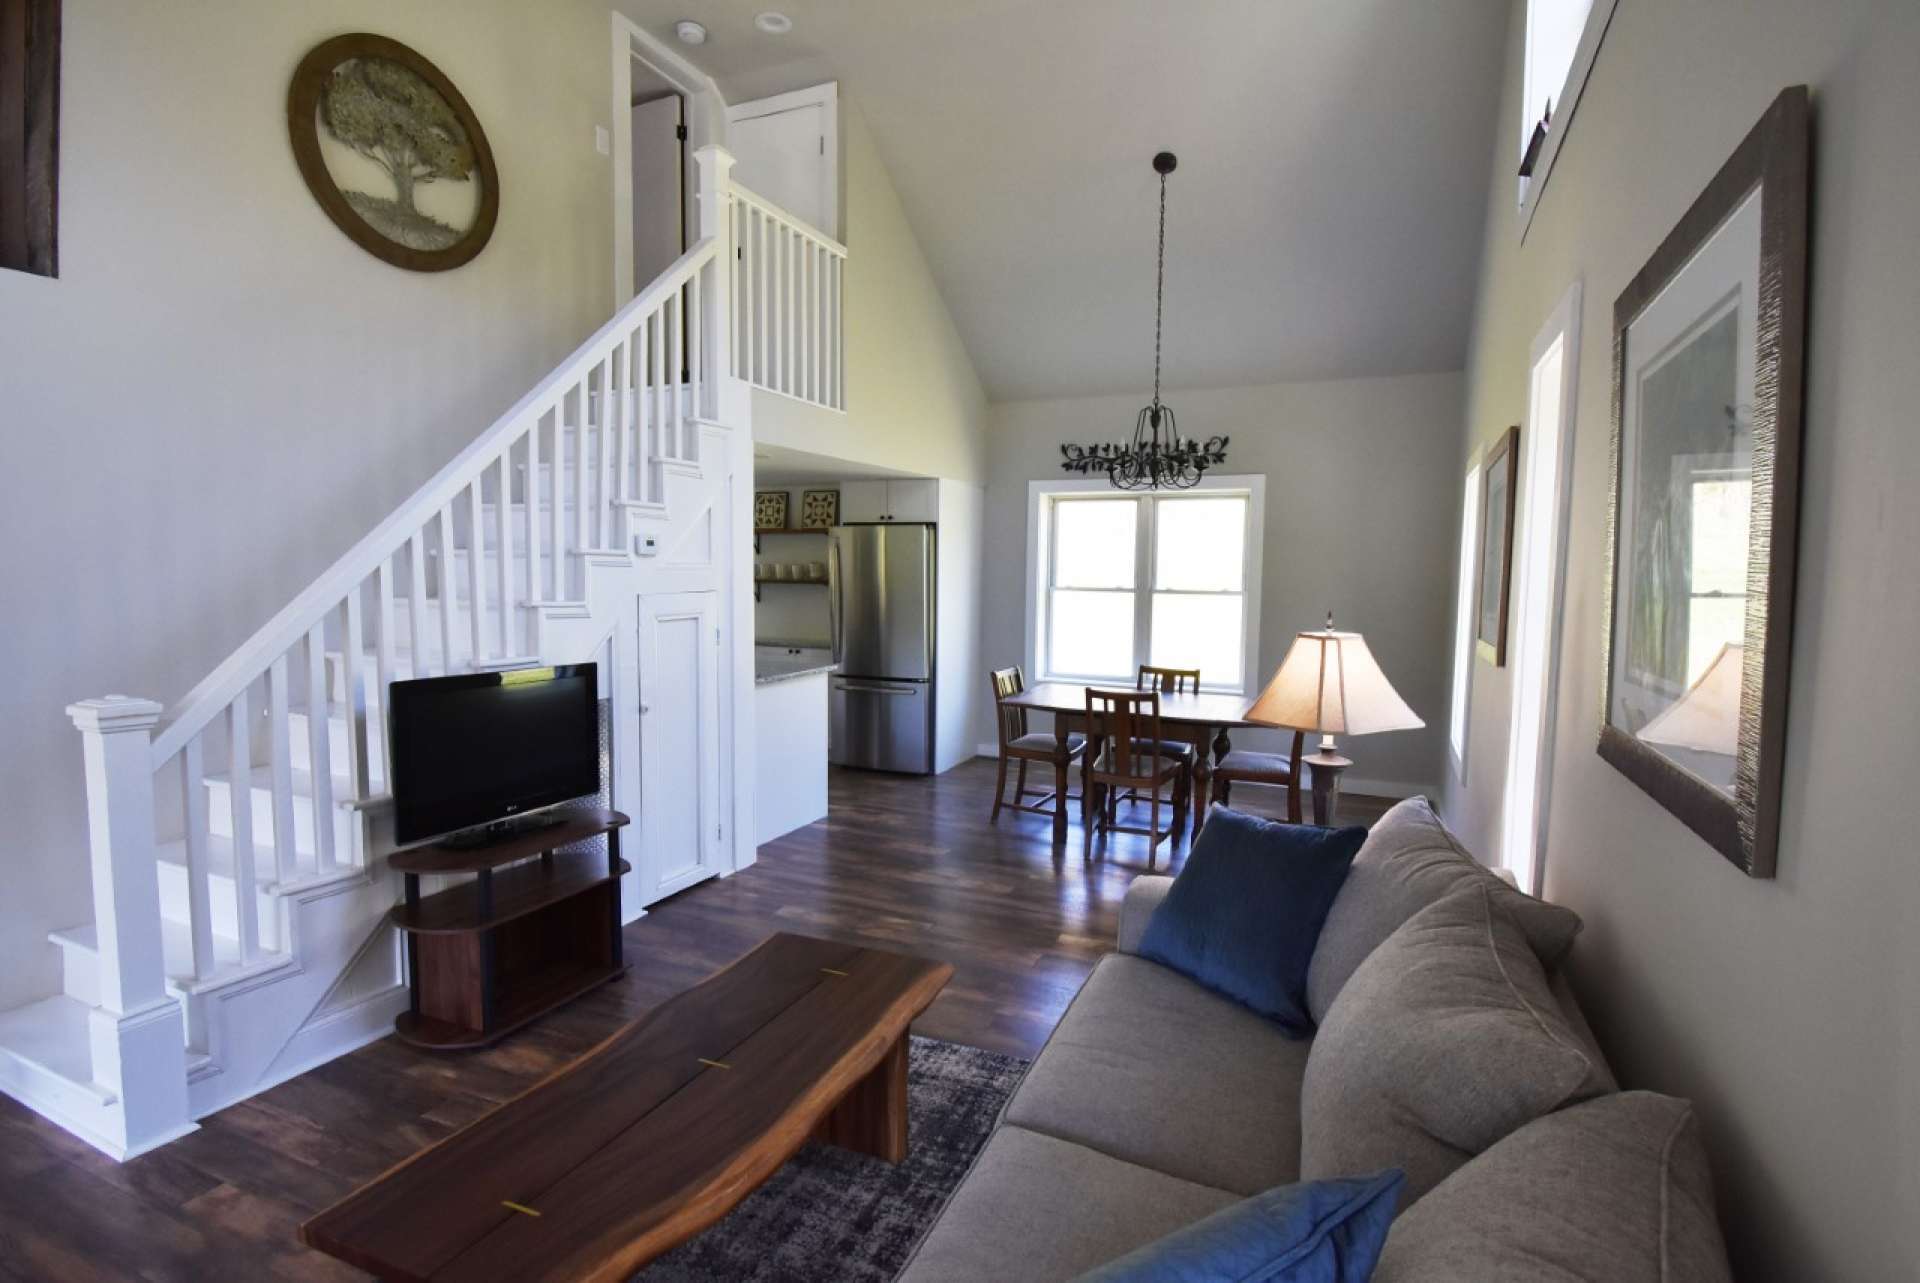 Dramatic 14 foot ceilings greet you as you enter the home and invite you to explore the many upgrades that include new electrical, plumbing, drywall, paint, insulation, and floor covering.